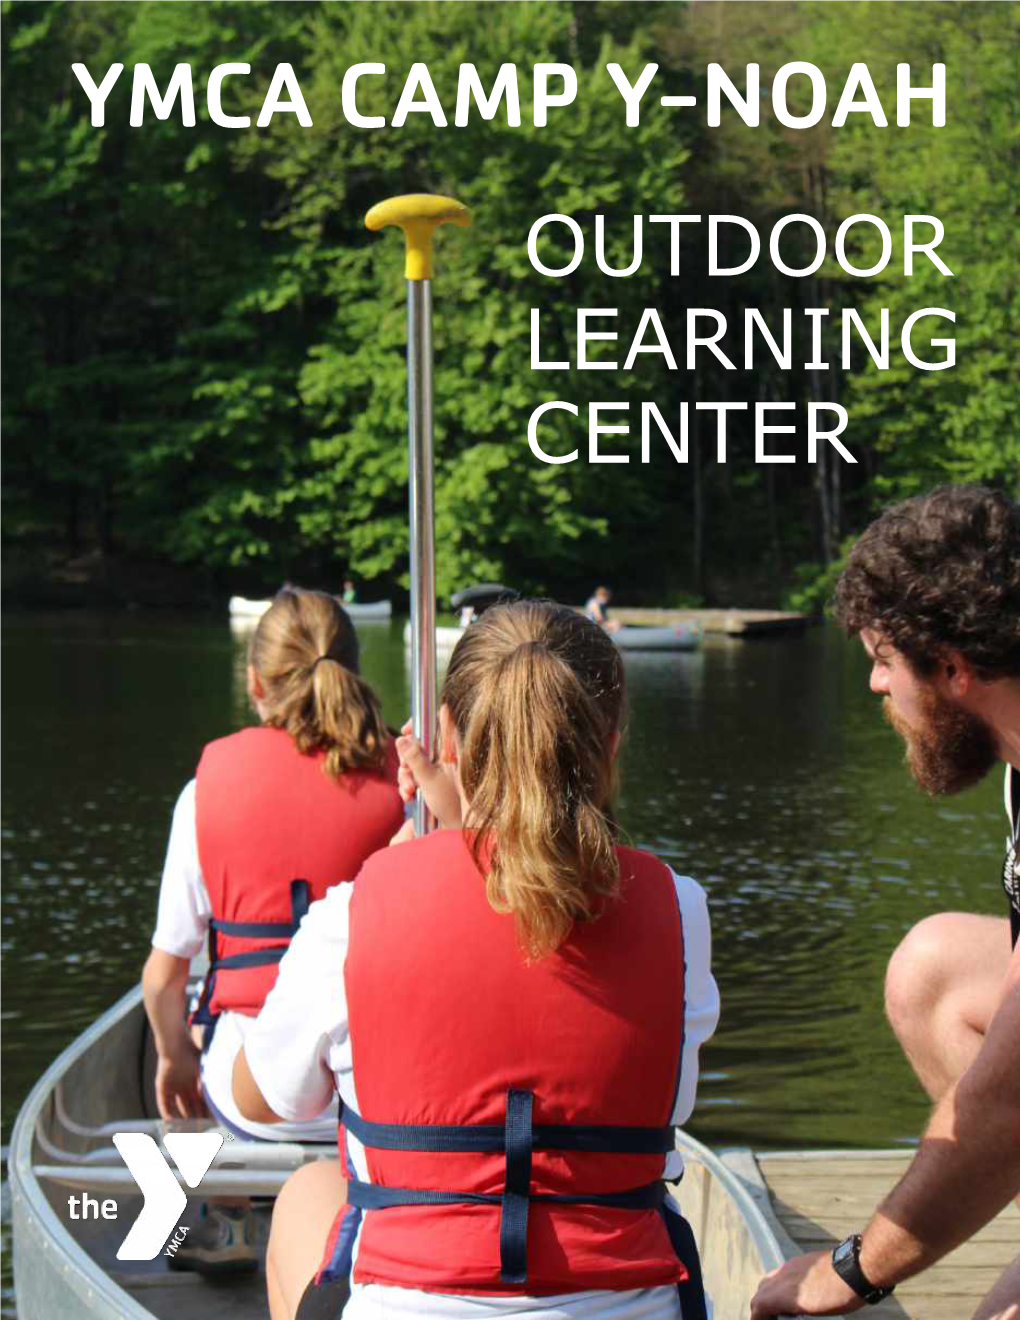 Ymca Camp Y-Noah Outdoor Learning Center Lodging Options Lodging Options